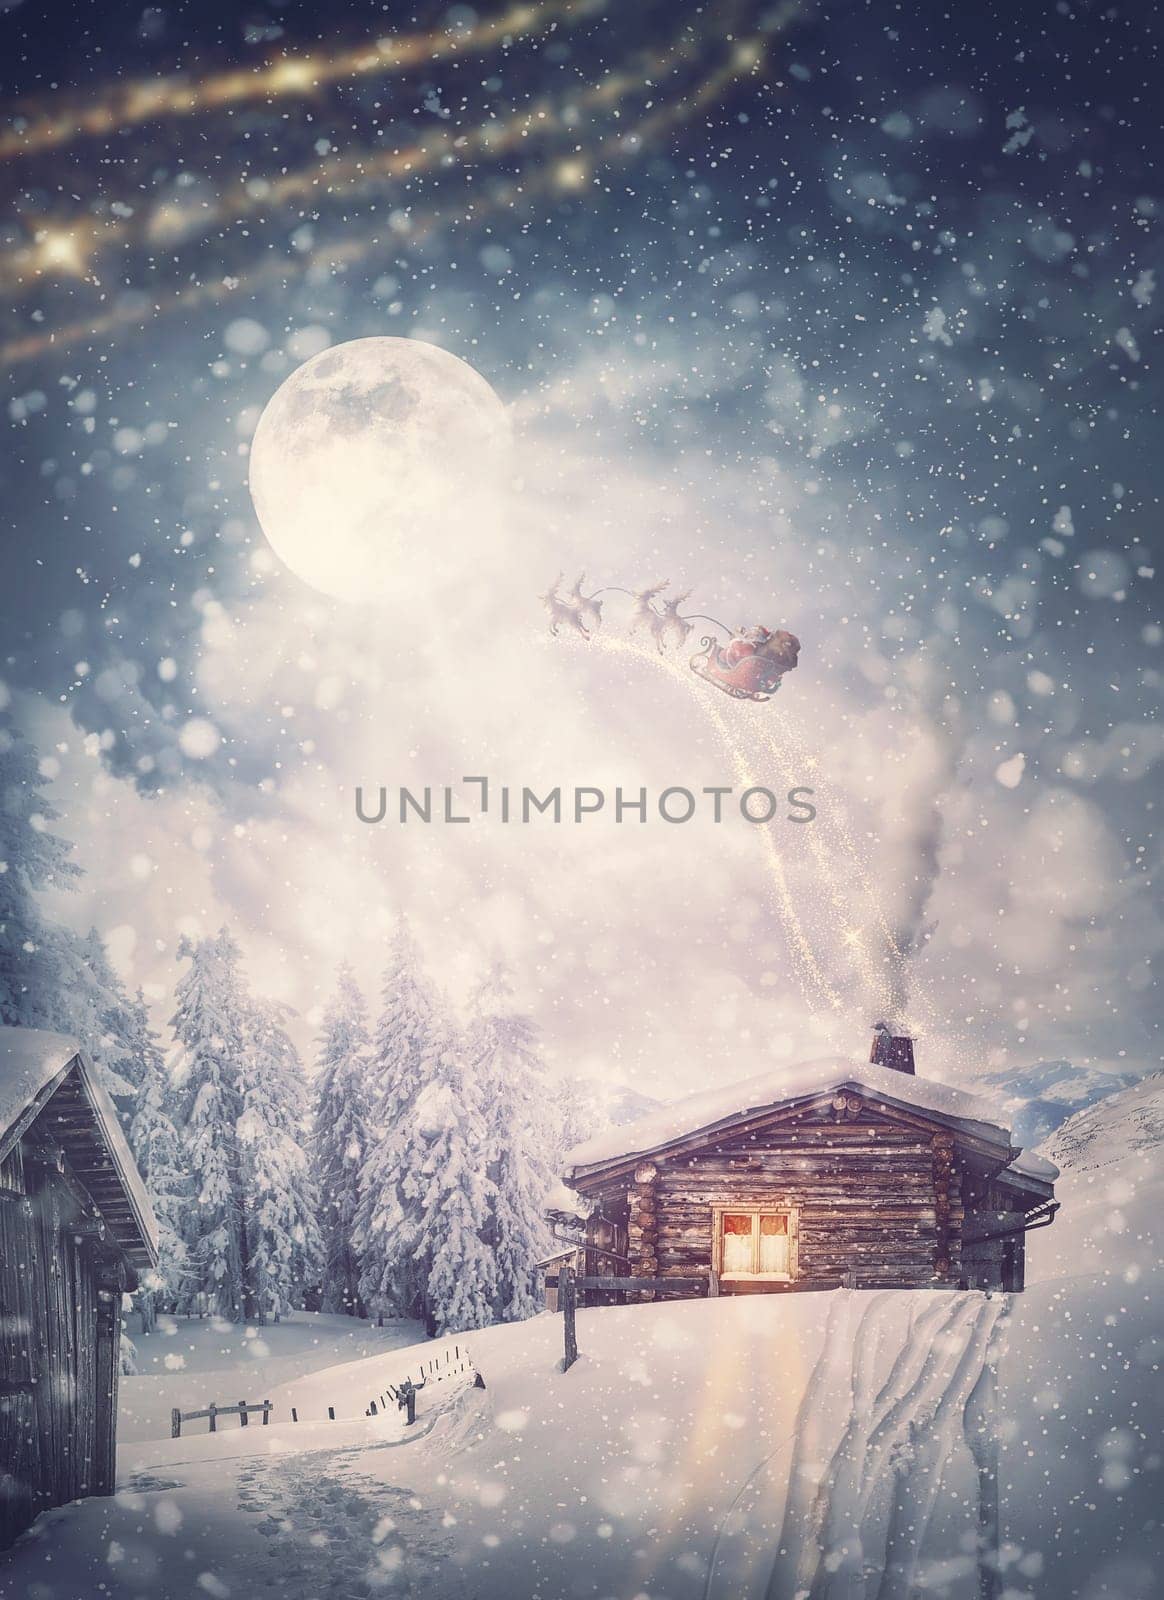 Magical holiday scene and Santa Claus sleigh with reindeers flying above the snowy house in the Christmas Eve. Wonderful snowflakes covering the village, and the full moon comes out of the clouds by psychoshadow